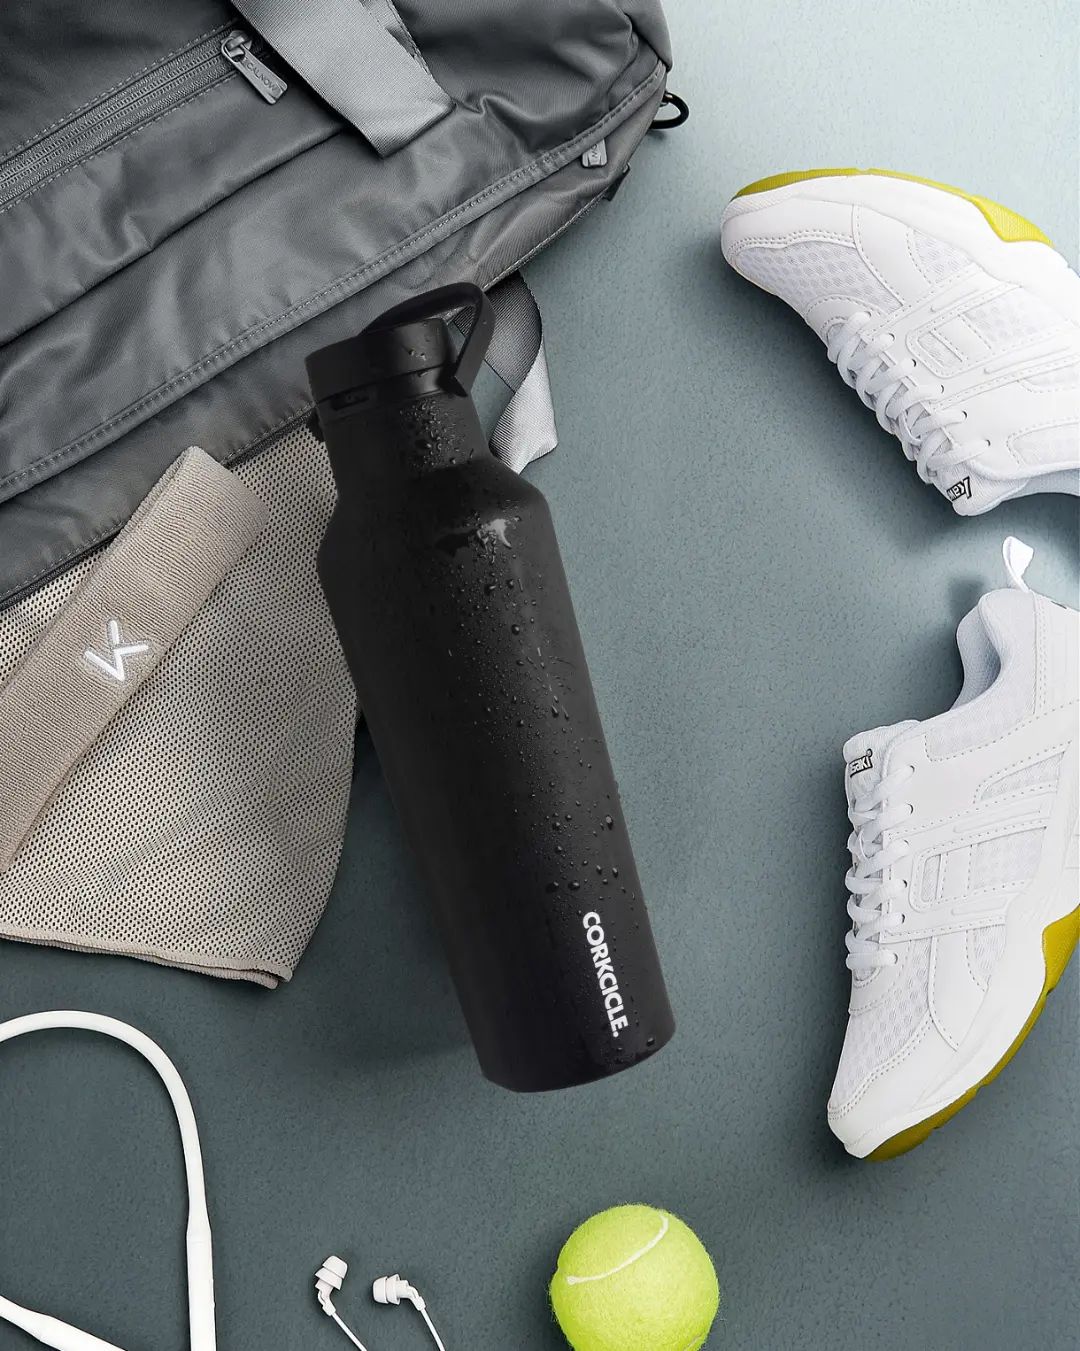 Last-minute gifts for athletes - Corkcicle water jug